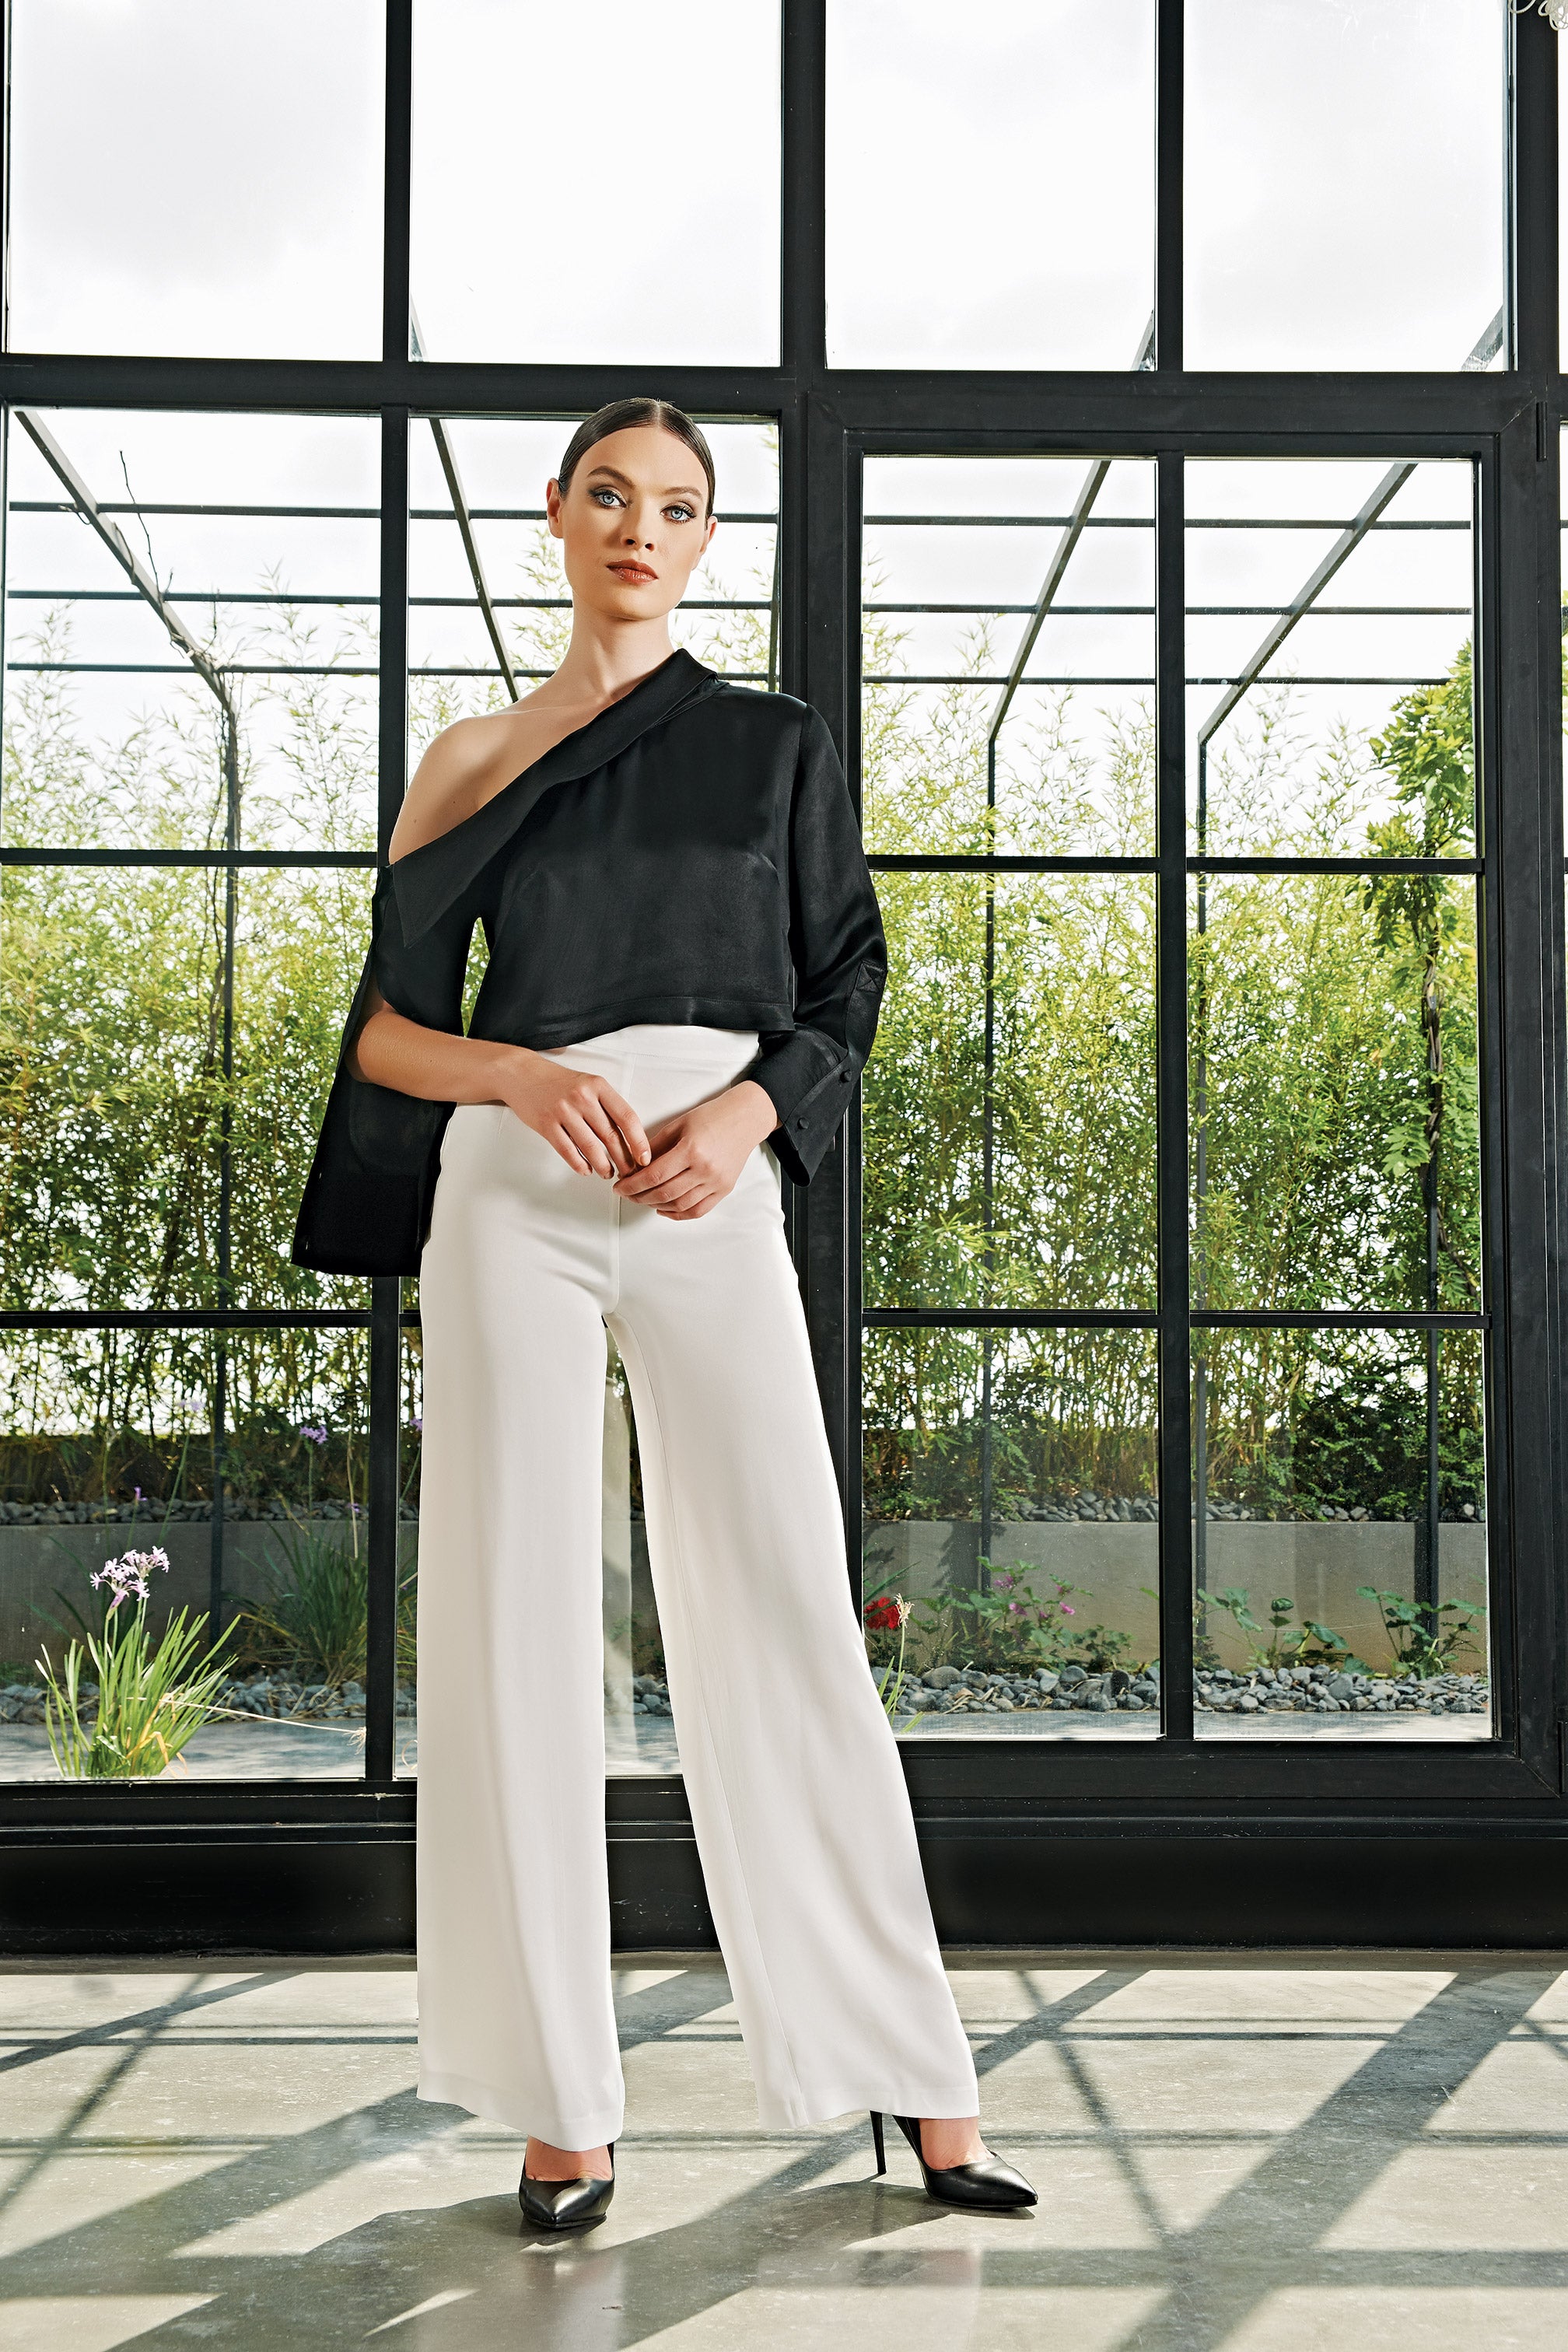 Satin trousers, sheer top & Fancy Friday - Nancys Fashion Style